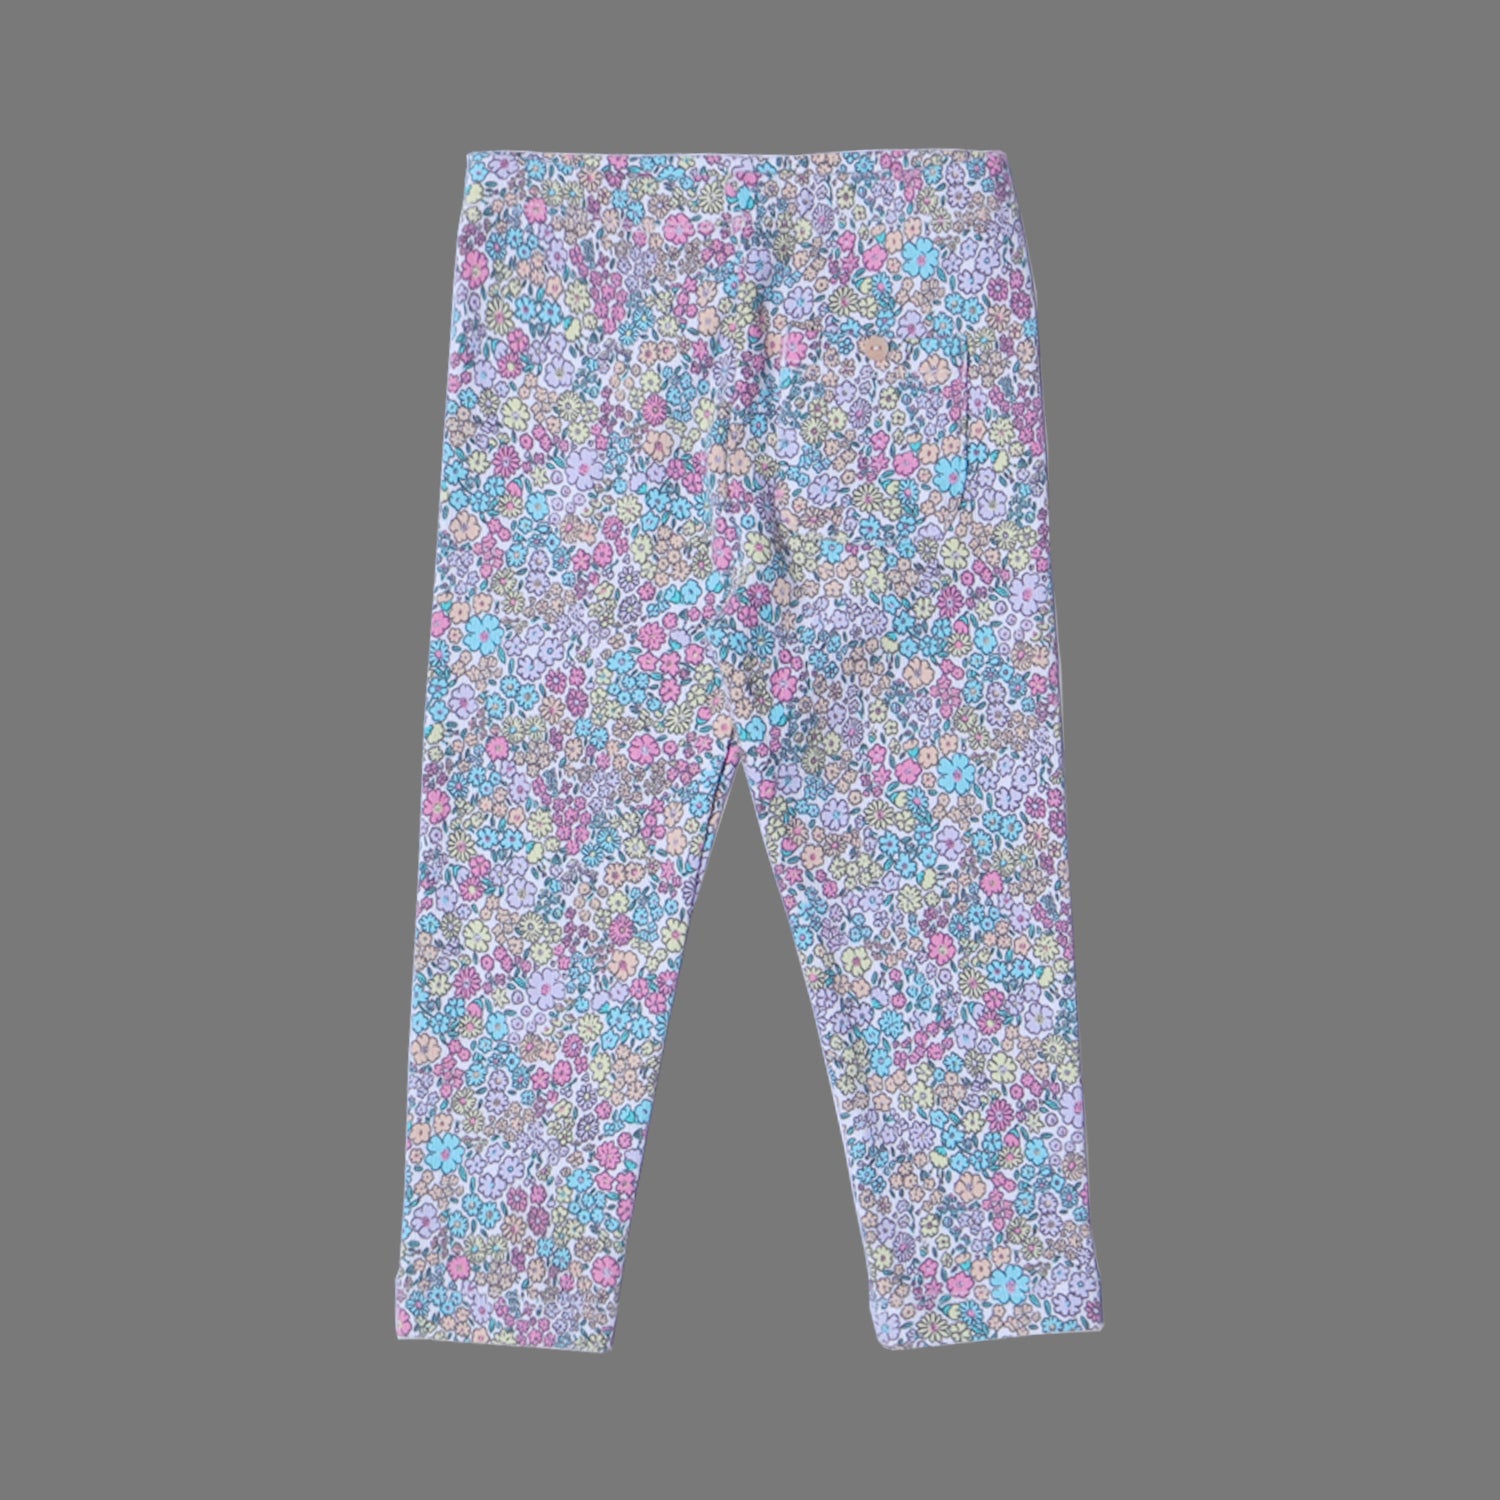 OFF WHITE YELLOW & PINK FLOWERS PRINTED RIBBED FABRIC BACK POCKET PAJAMA